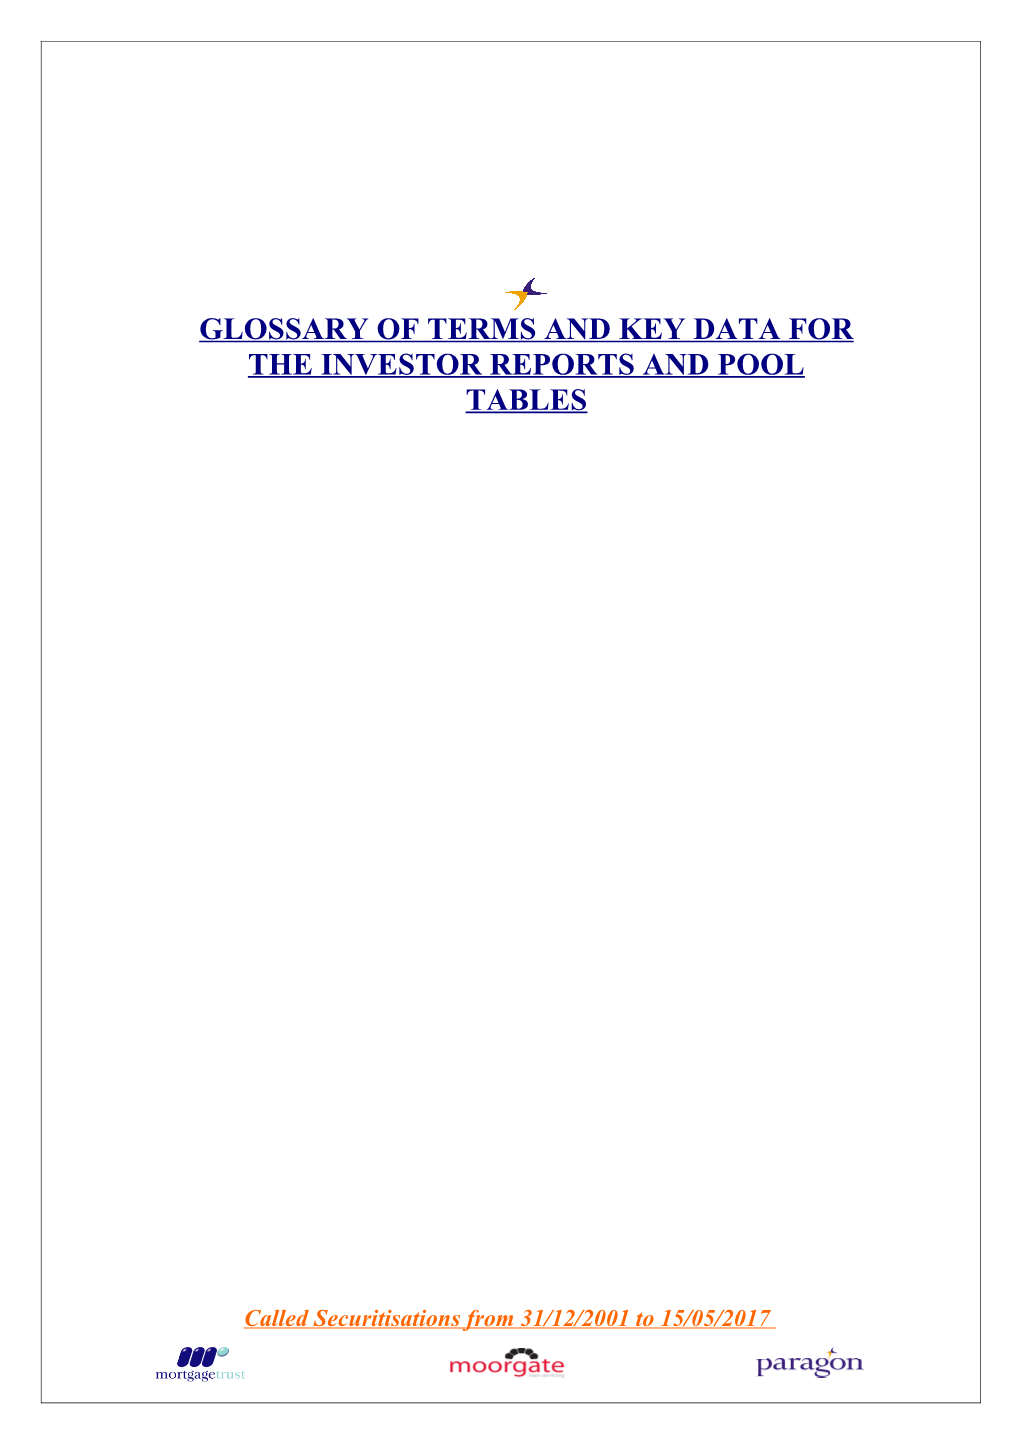 Glossary of Terms and Key Data for the Investor Reports